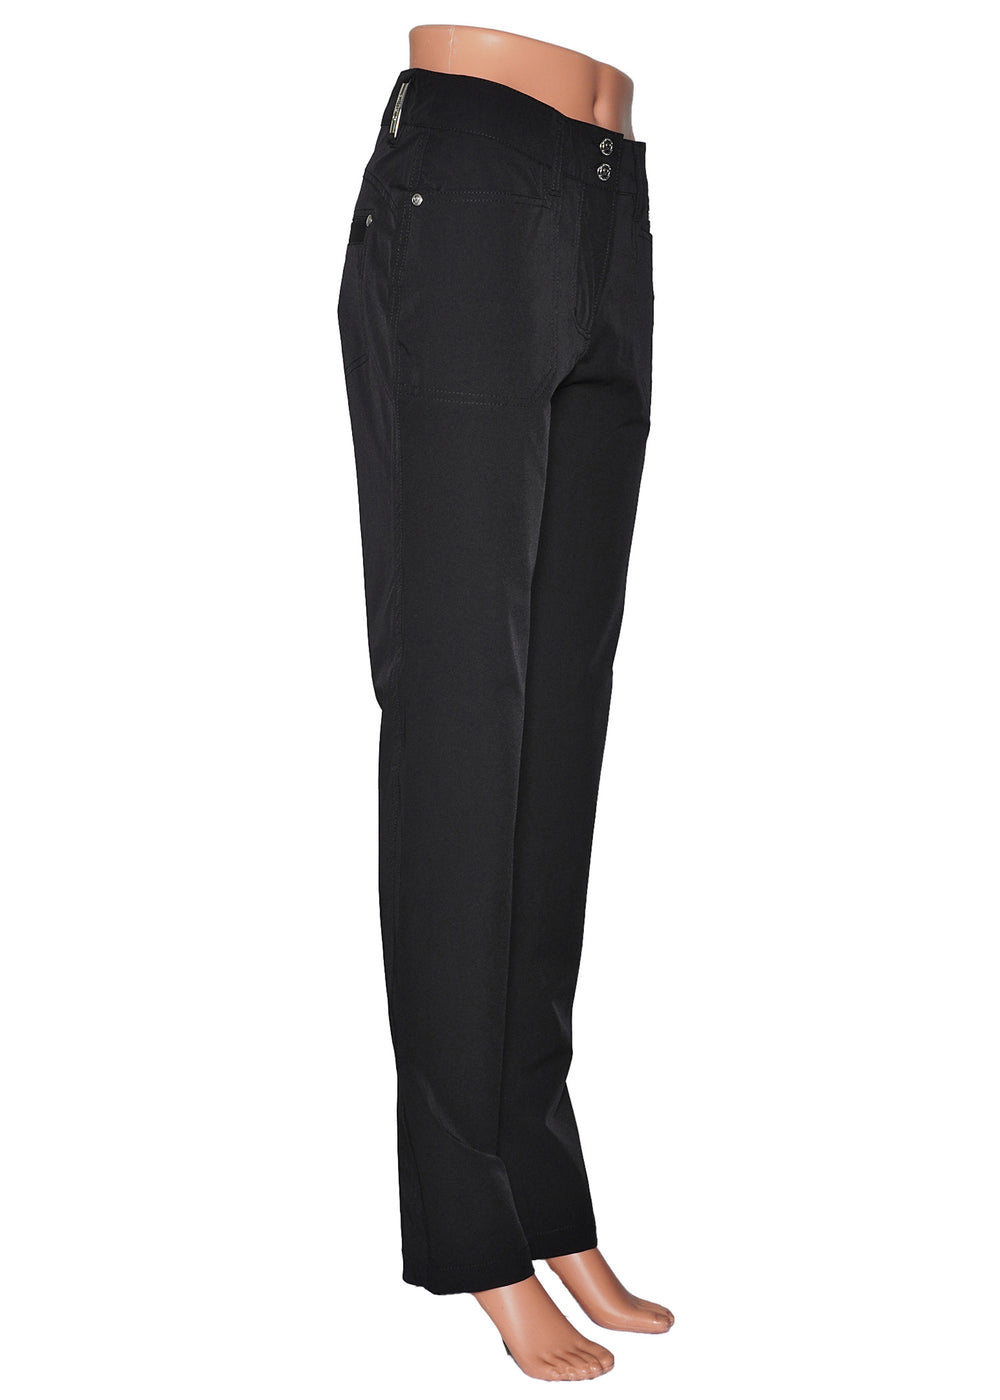 Daily Sports Miracle Stretch Pant - Black - Size 4 - Skorzie